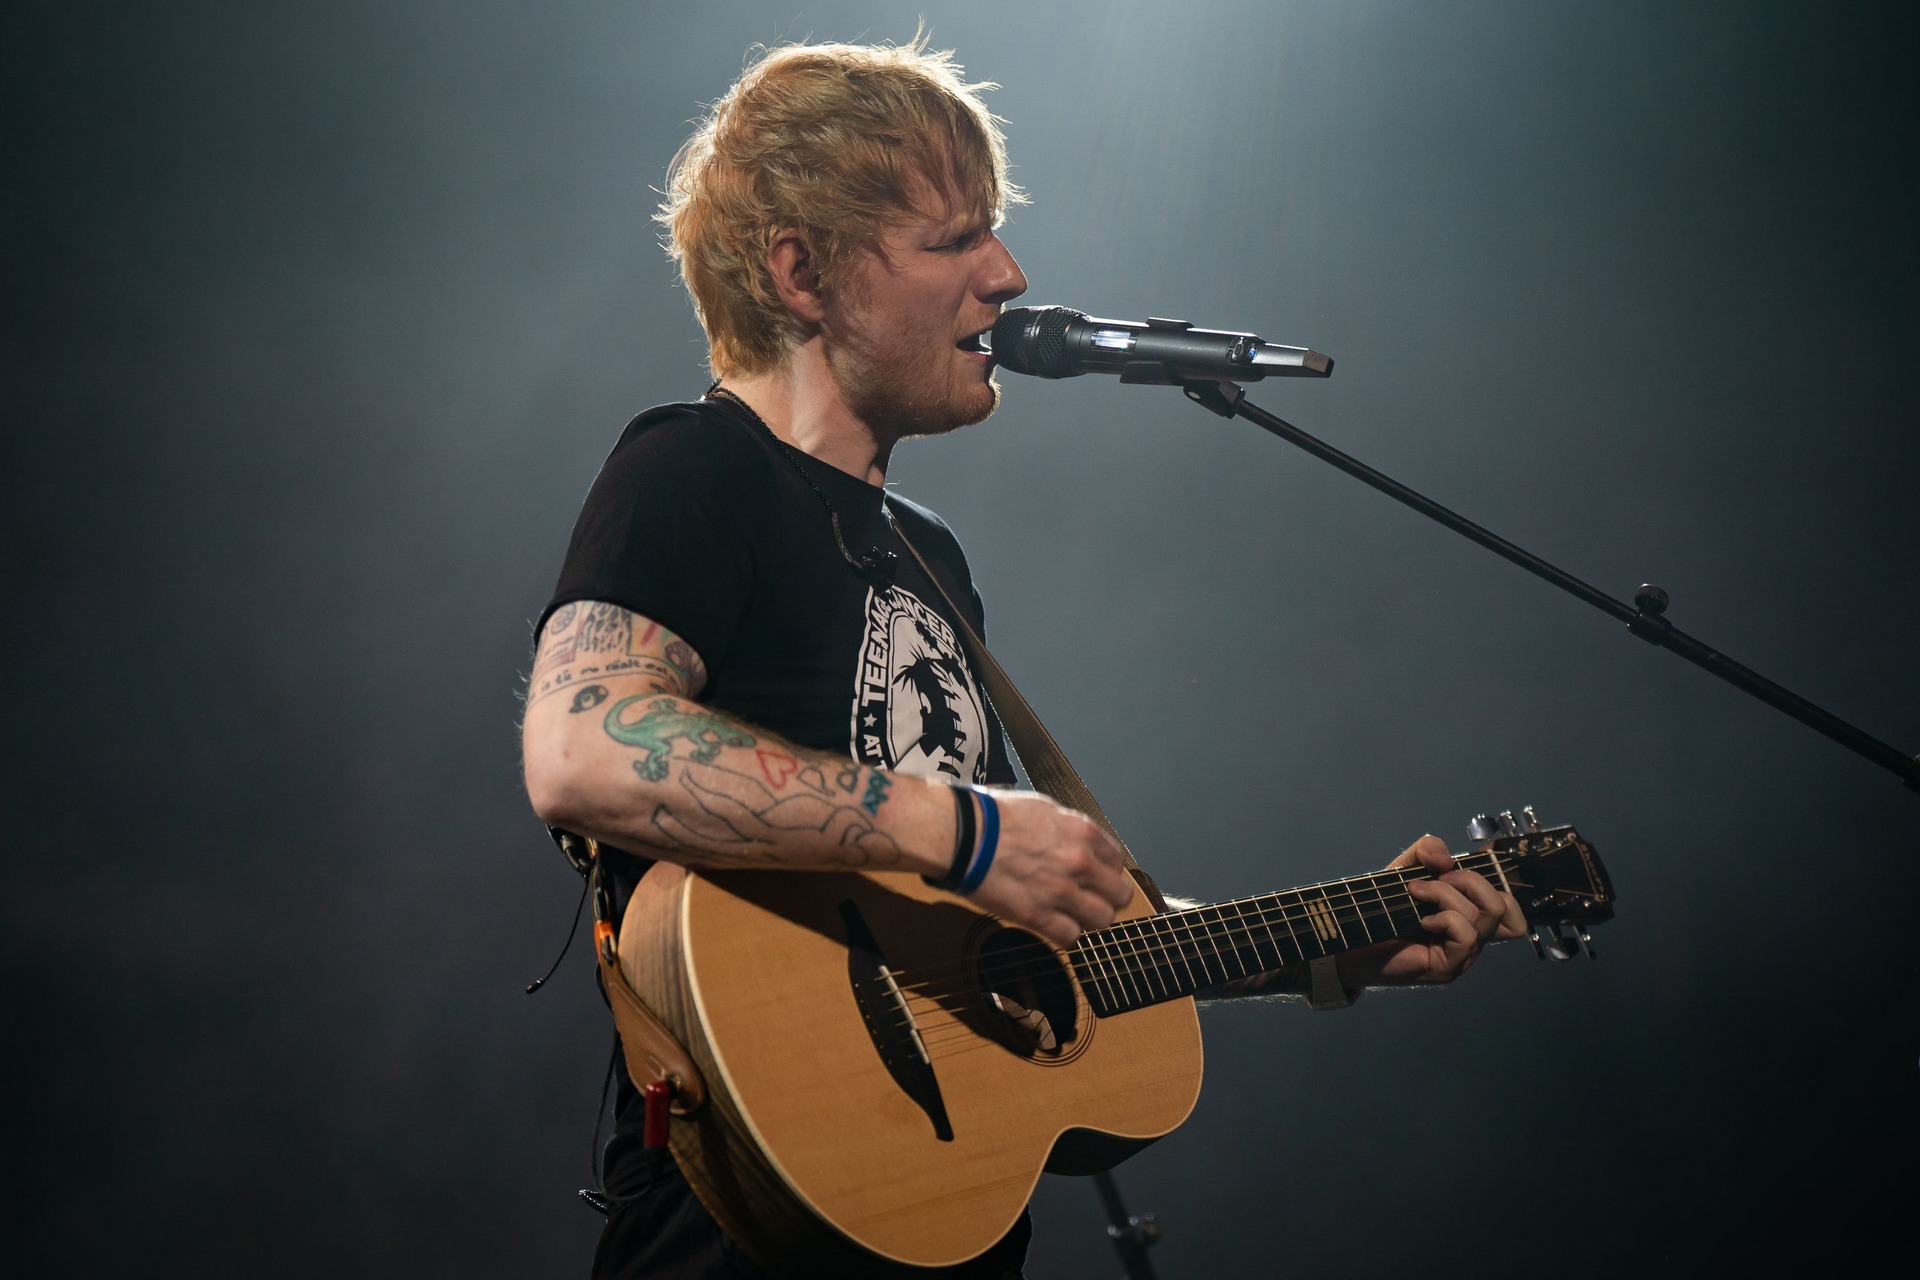 Tickets to Ed Sheeran gigs were sold at inflated prices.